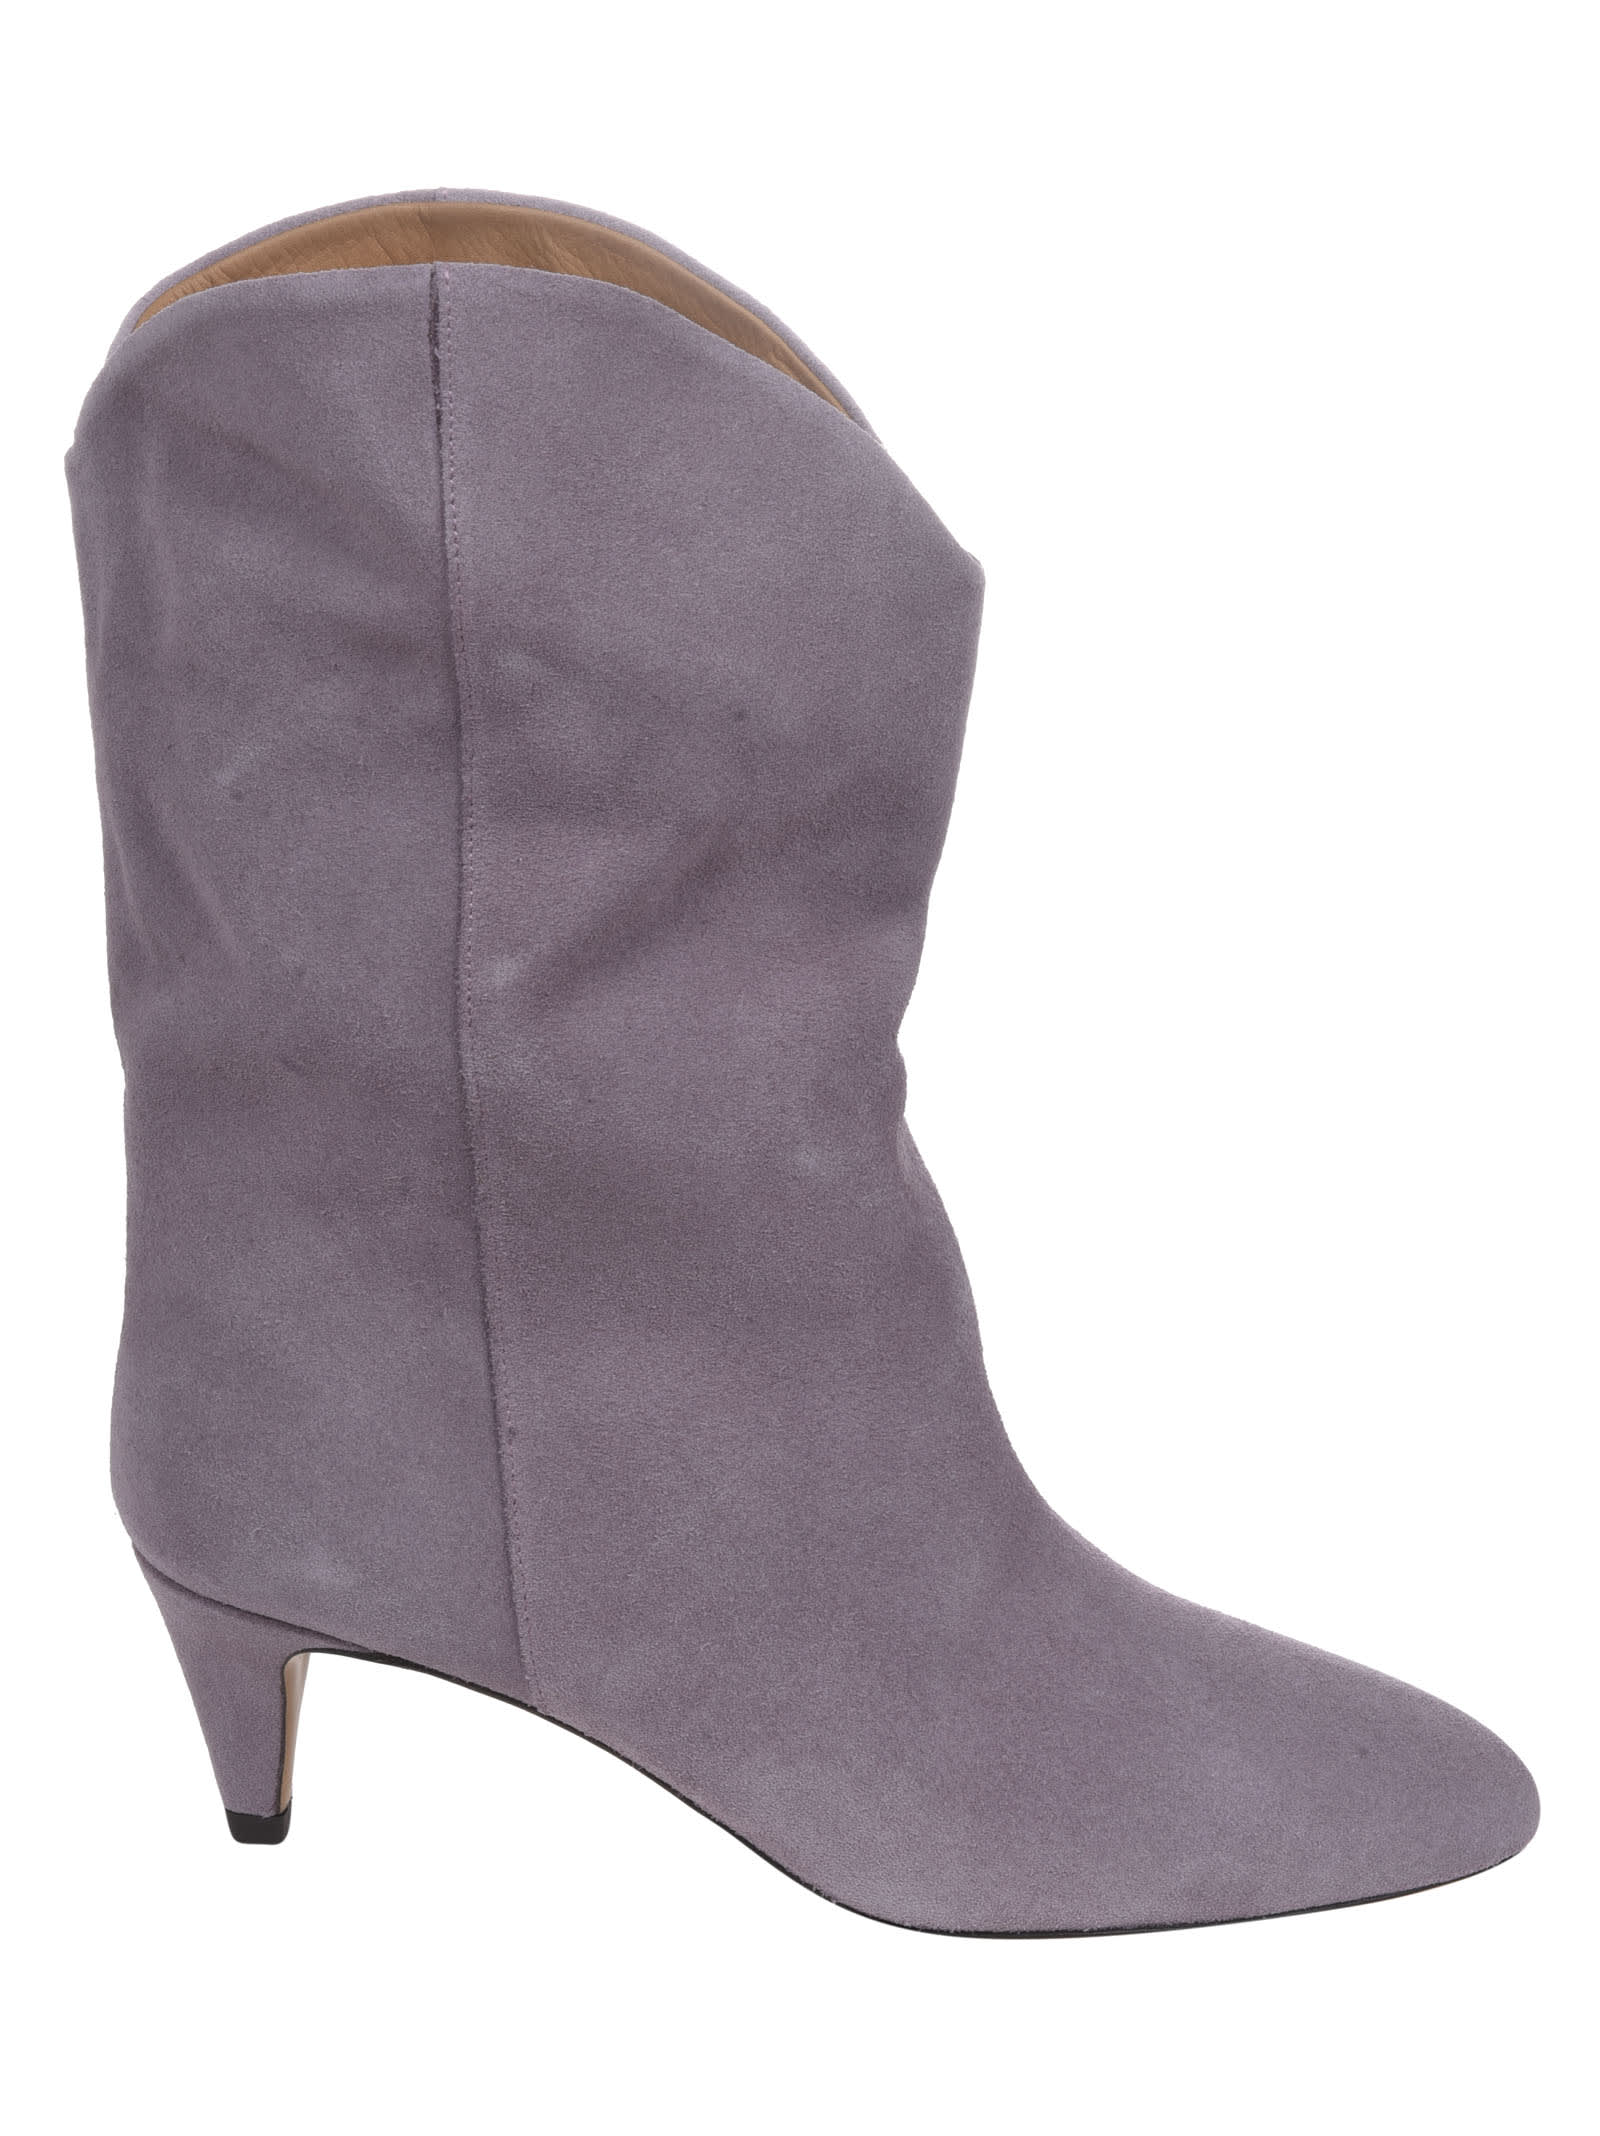 Buy Isabel Marant Dernee Boots online, shop Isabel Marant shoes with free shipping